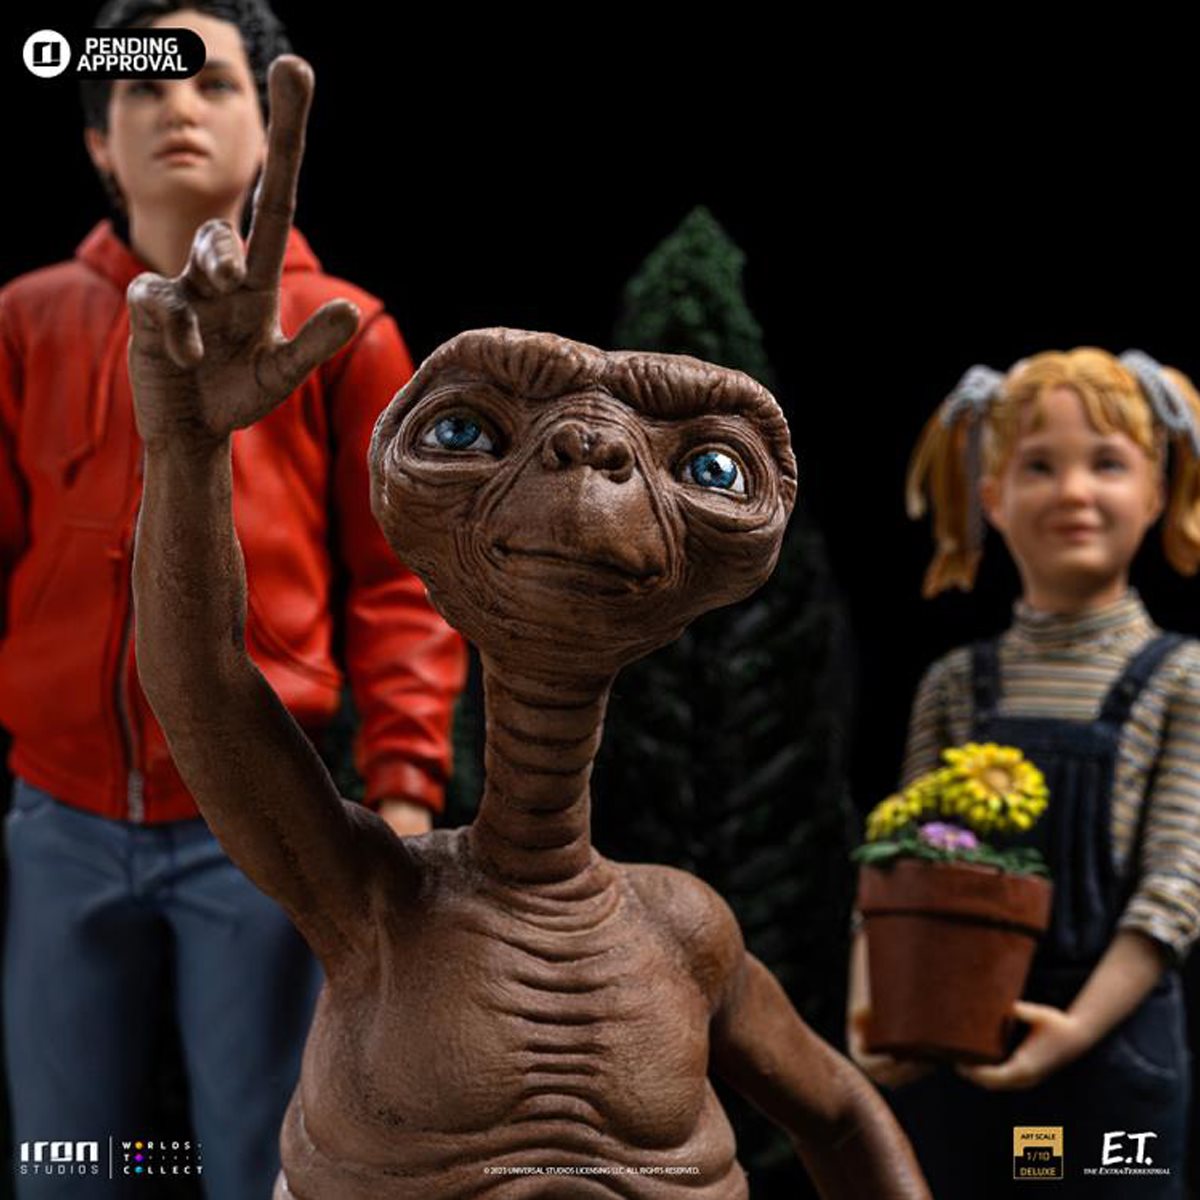 E.T. the Extra-Terrestrial, Elliot, and Gertie Limited Edition 1:10 Art  Scale Statue